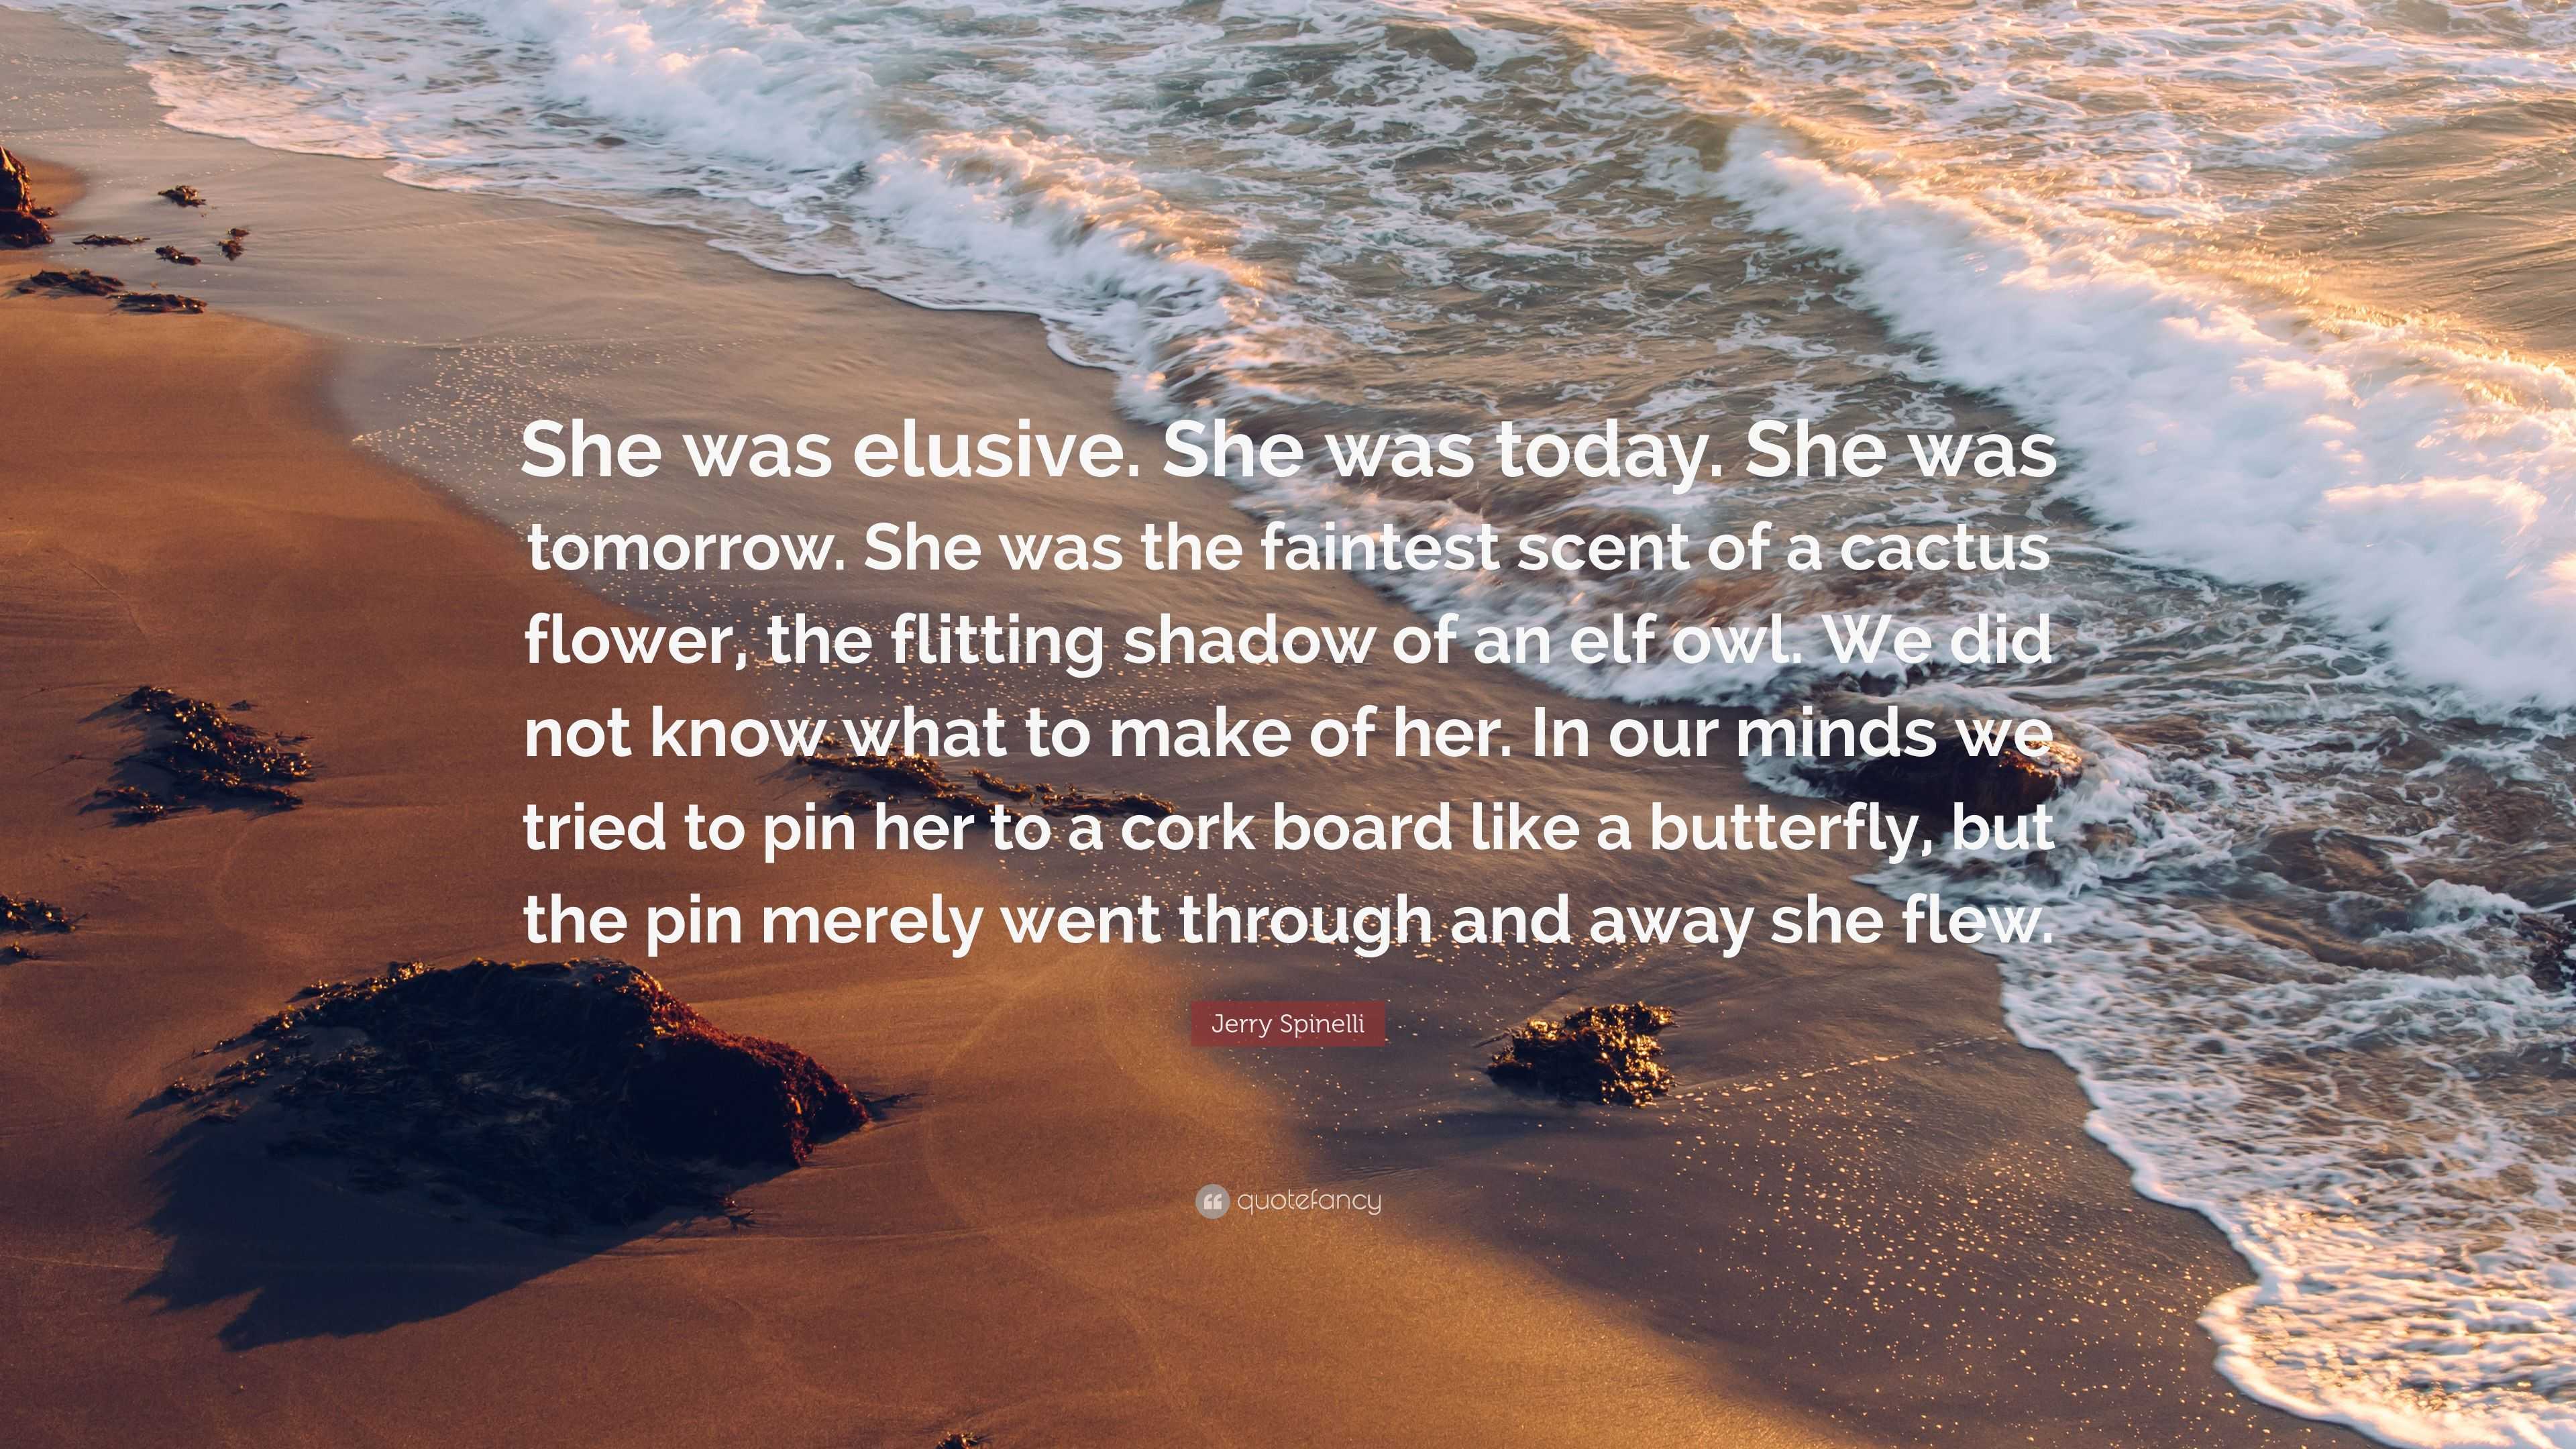 Jerry Spinelli Quote: “She was elusive. She was today. She was tomorrow ...